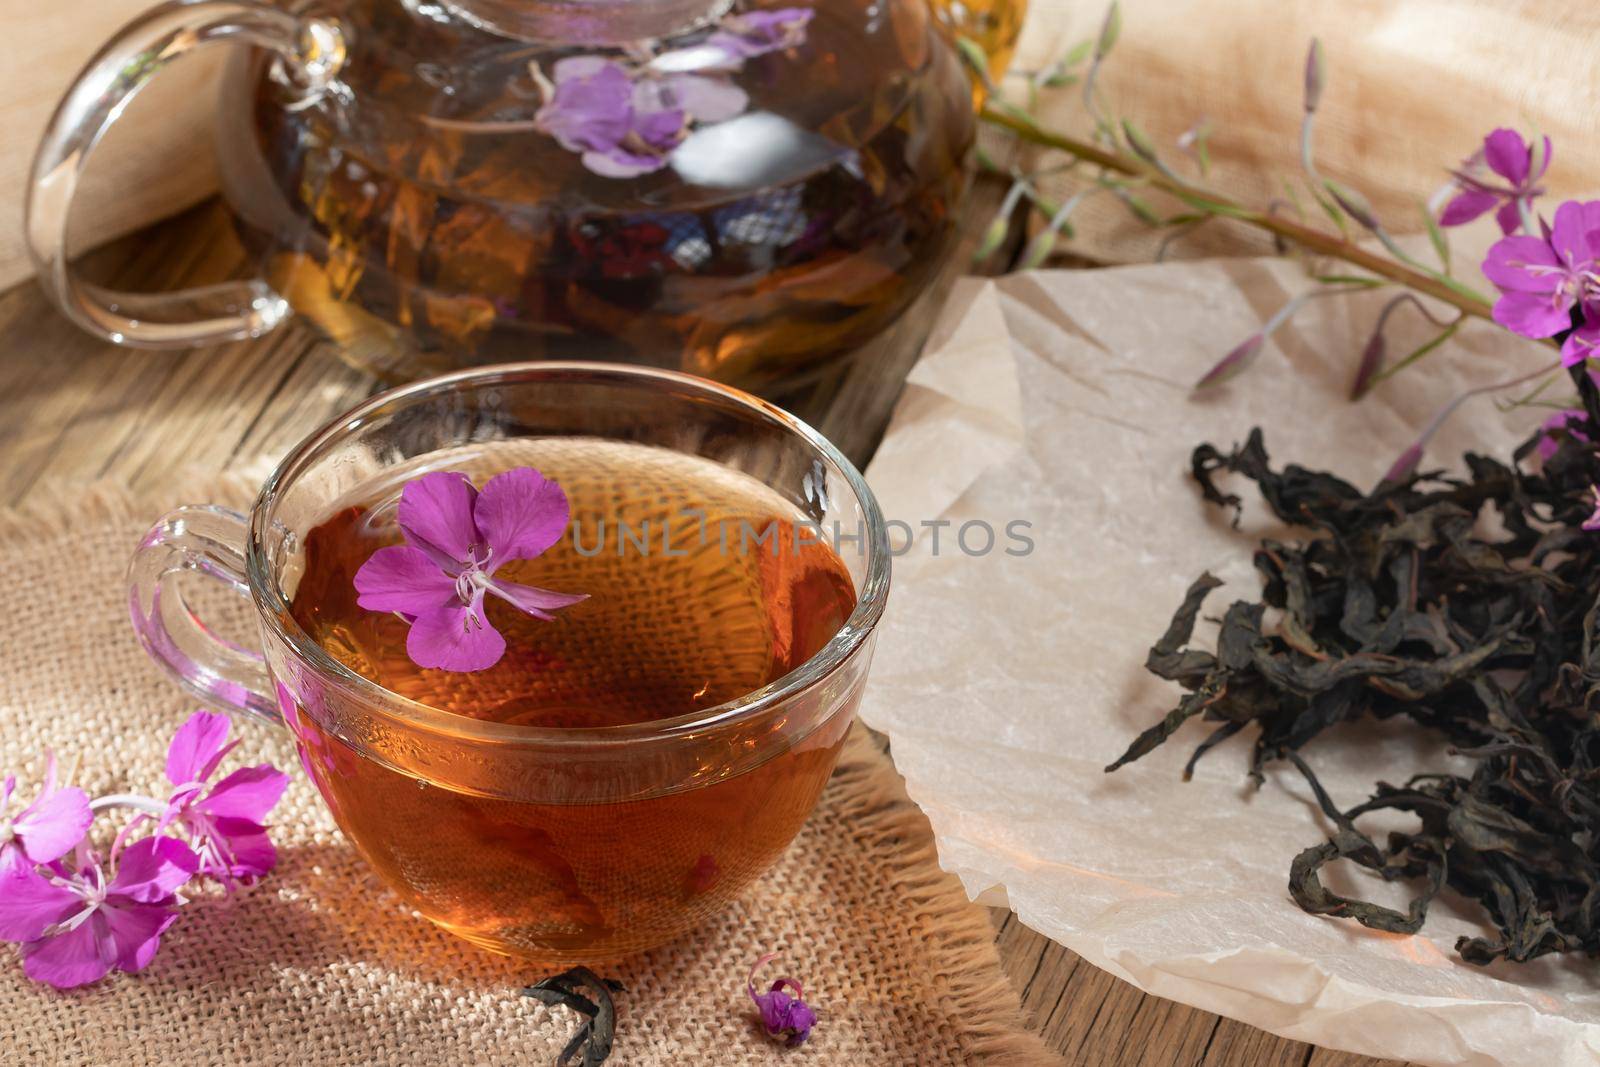 Herbal tea made from fireweed known as blooming sally in teapot and cup.